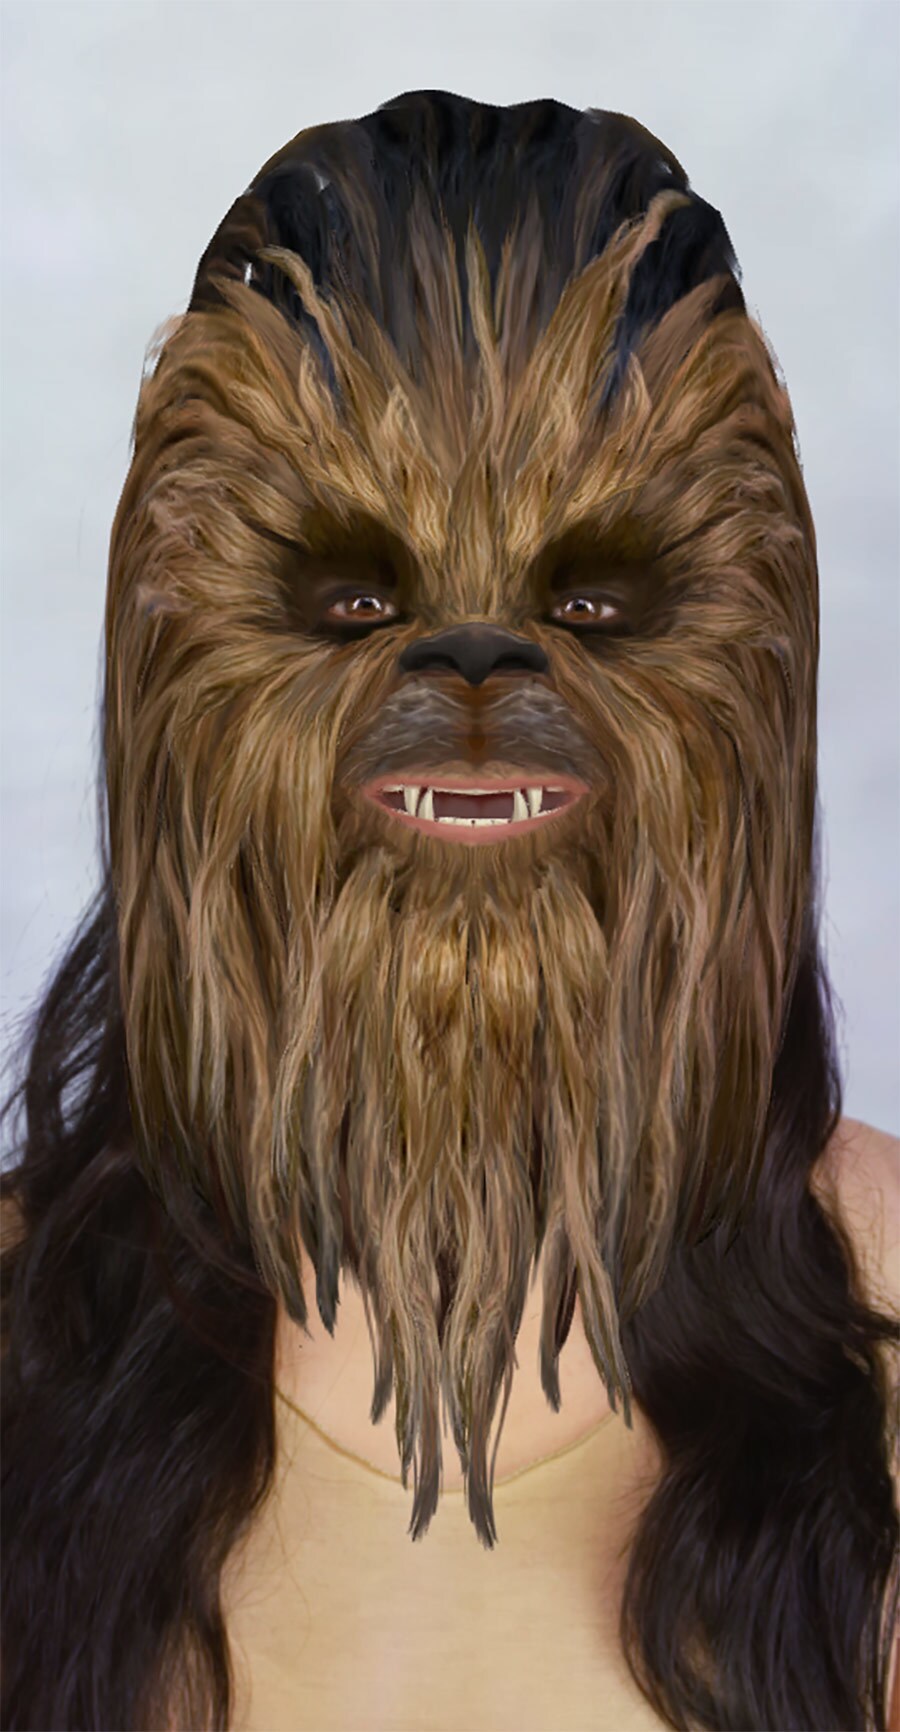 A Chewbacca selfie made with a Snapchat Star Wars themed image filter.